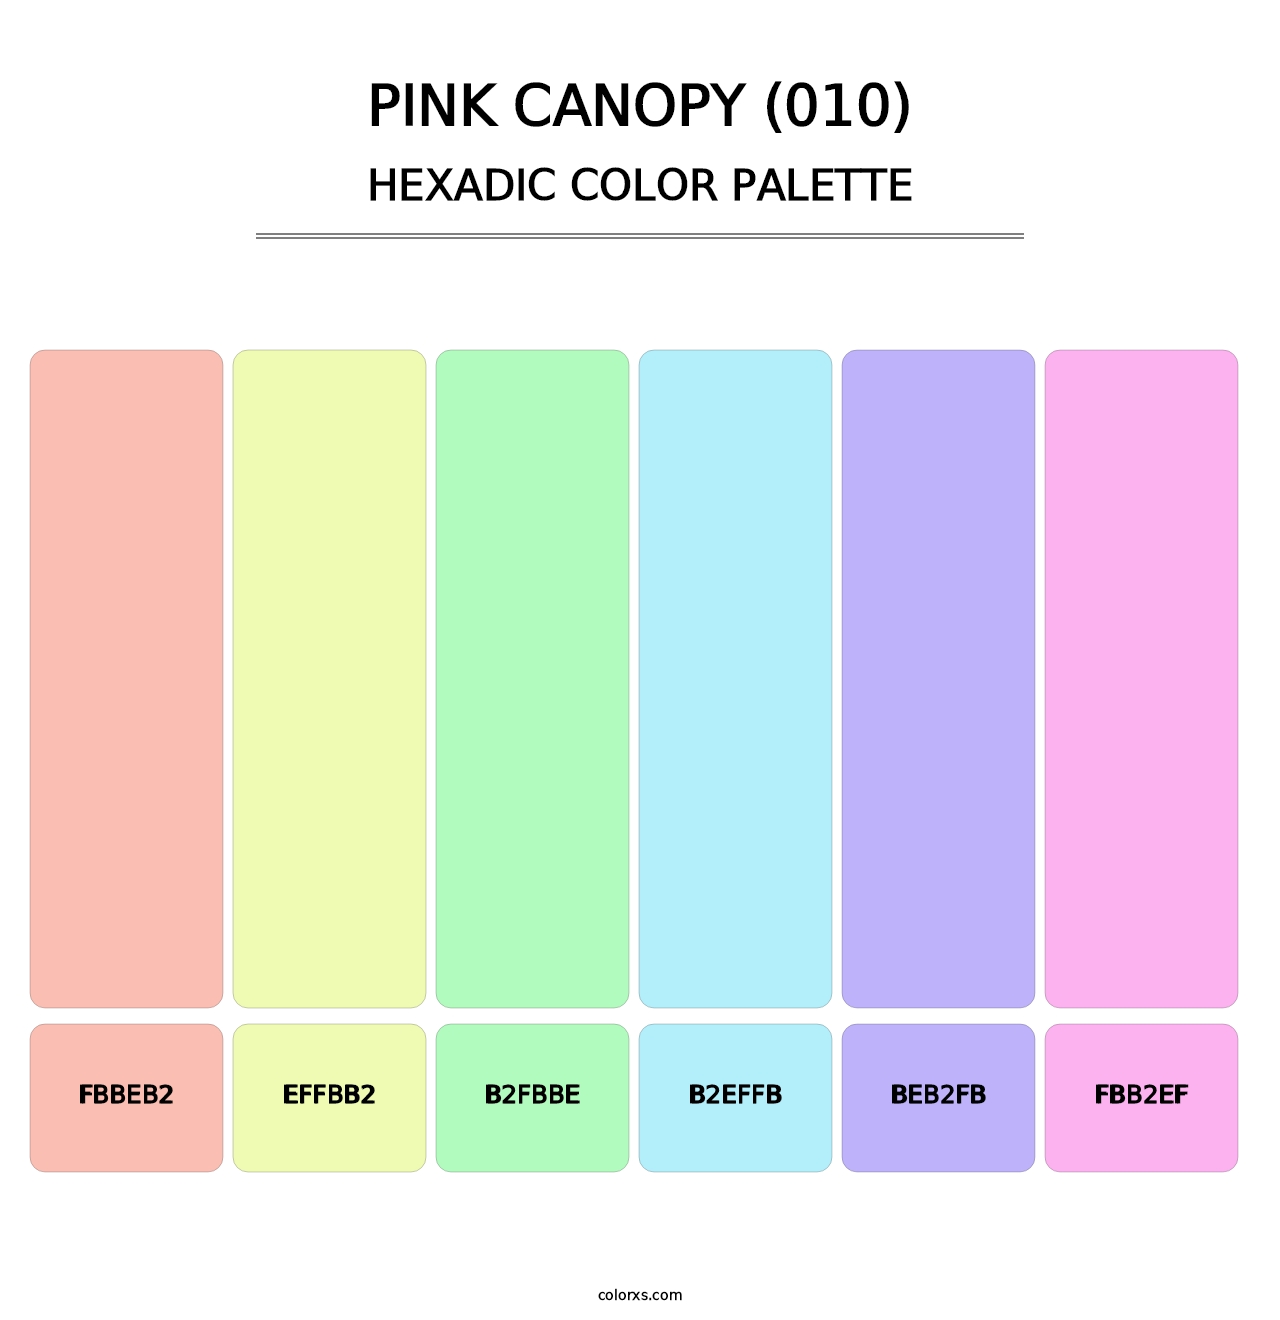 Pink Canopy (010) - Hexadic Color Palette